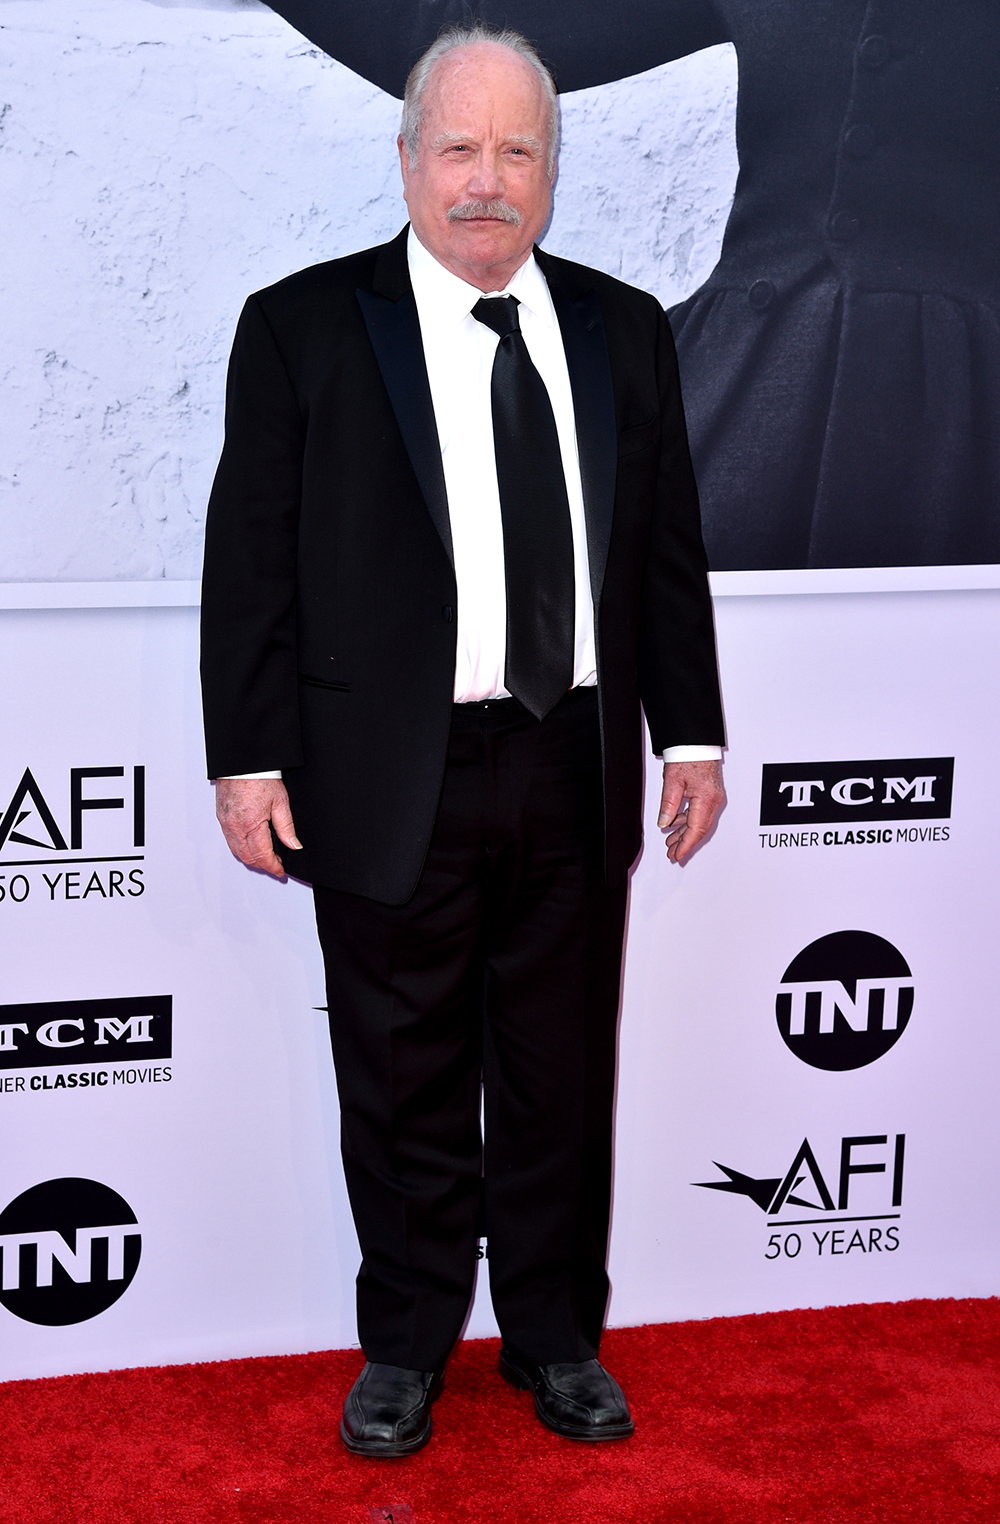 <p>Richard Dreyfuss attended the AFI Life Achievement Award Gala in Los Angeles in June 2017. The star opted for a go-to red carpet classic with a black suit and tie. Richard also completed this look with black dress shoes for ultimate comfort.</p>